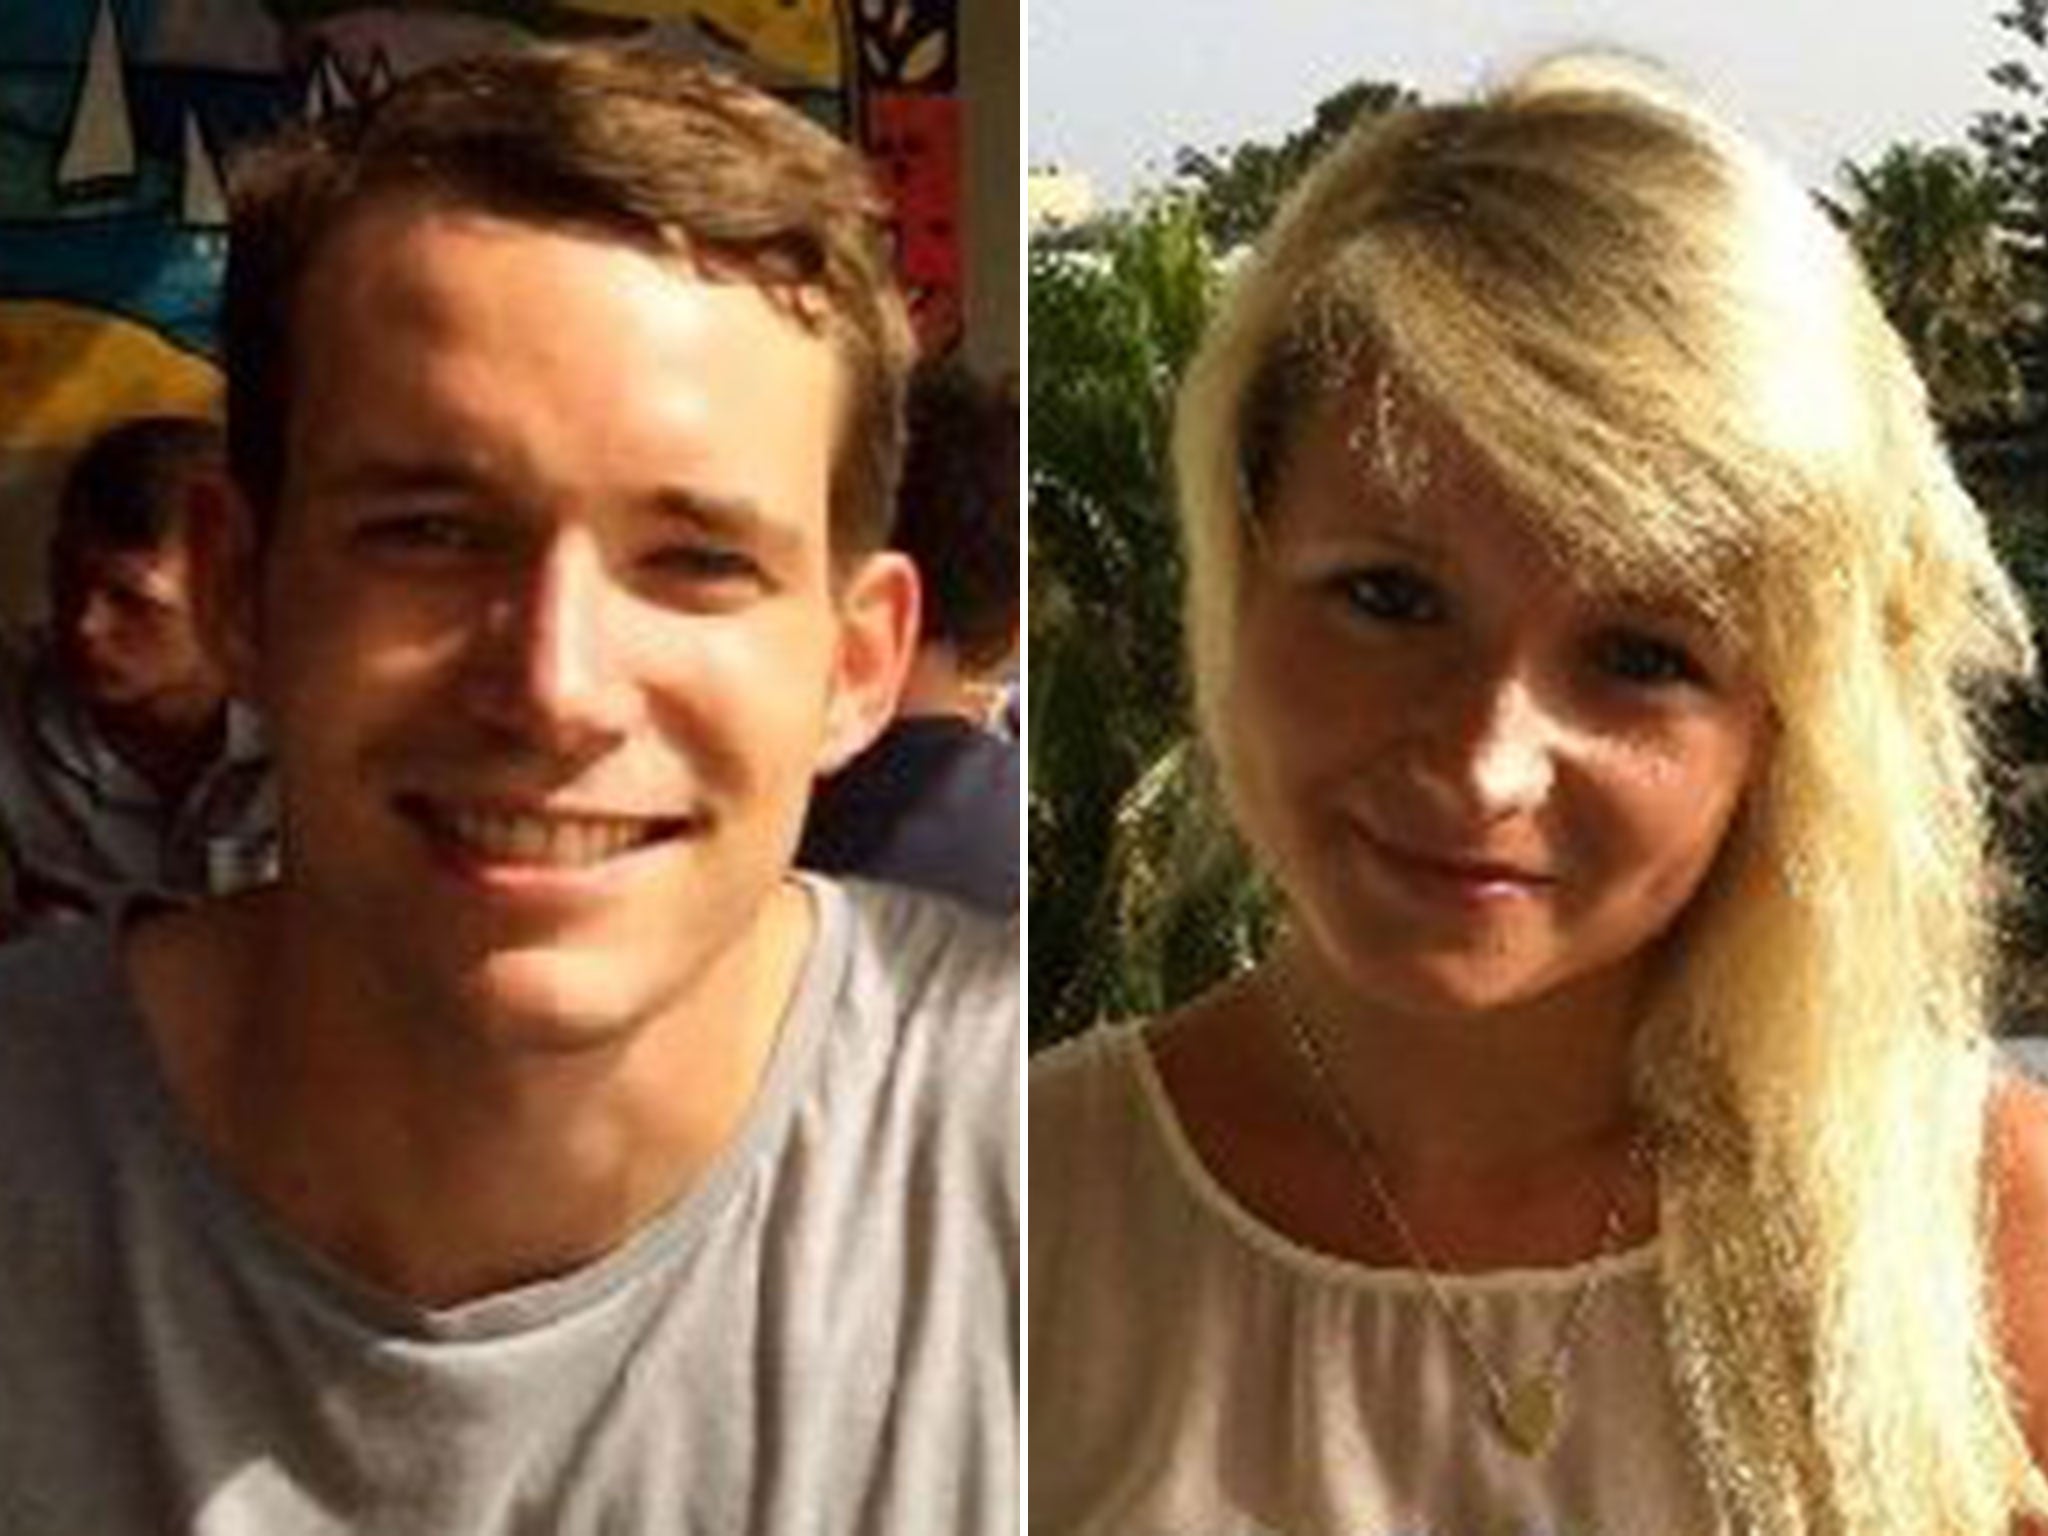 David Miller, 24, and Hannah Witheridge, 23 were killed on the small island of Koh Tao last September